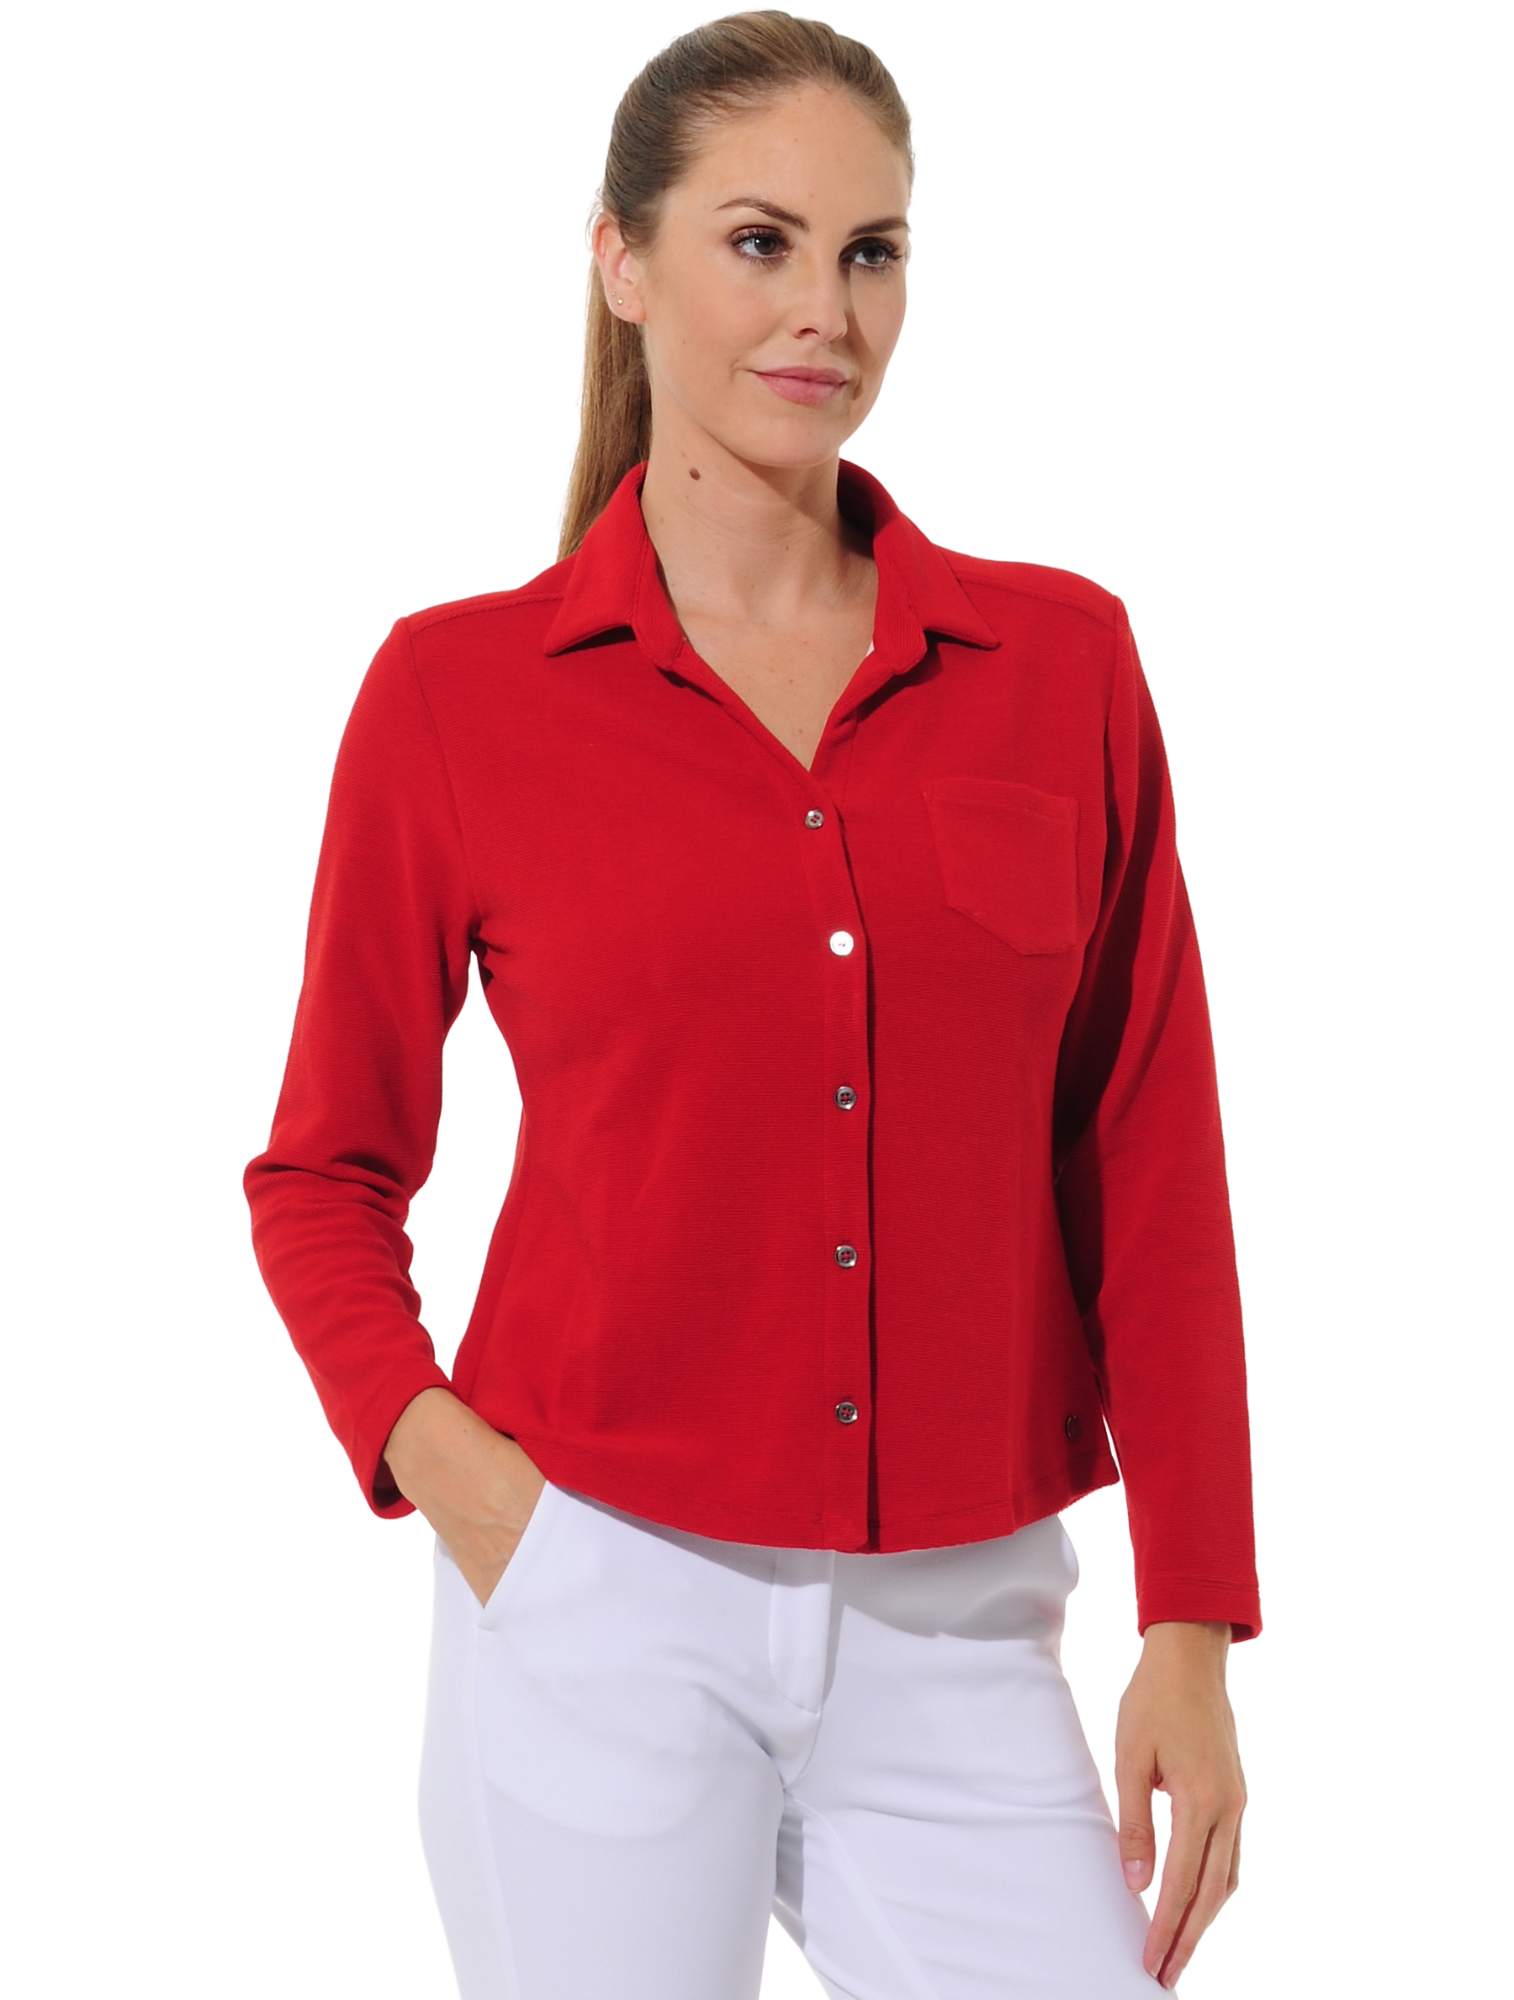 Frottee Golf Poloshirt red